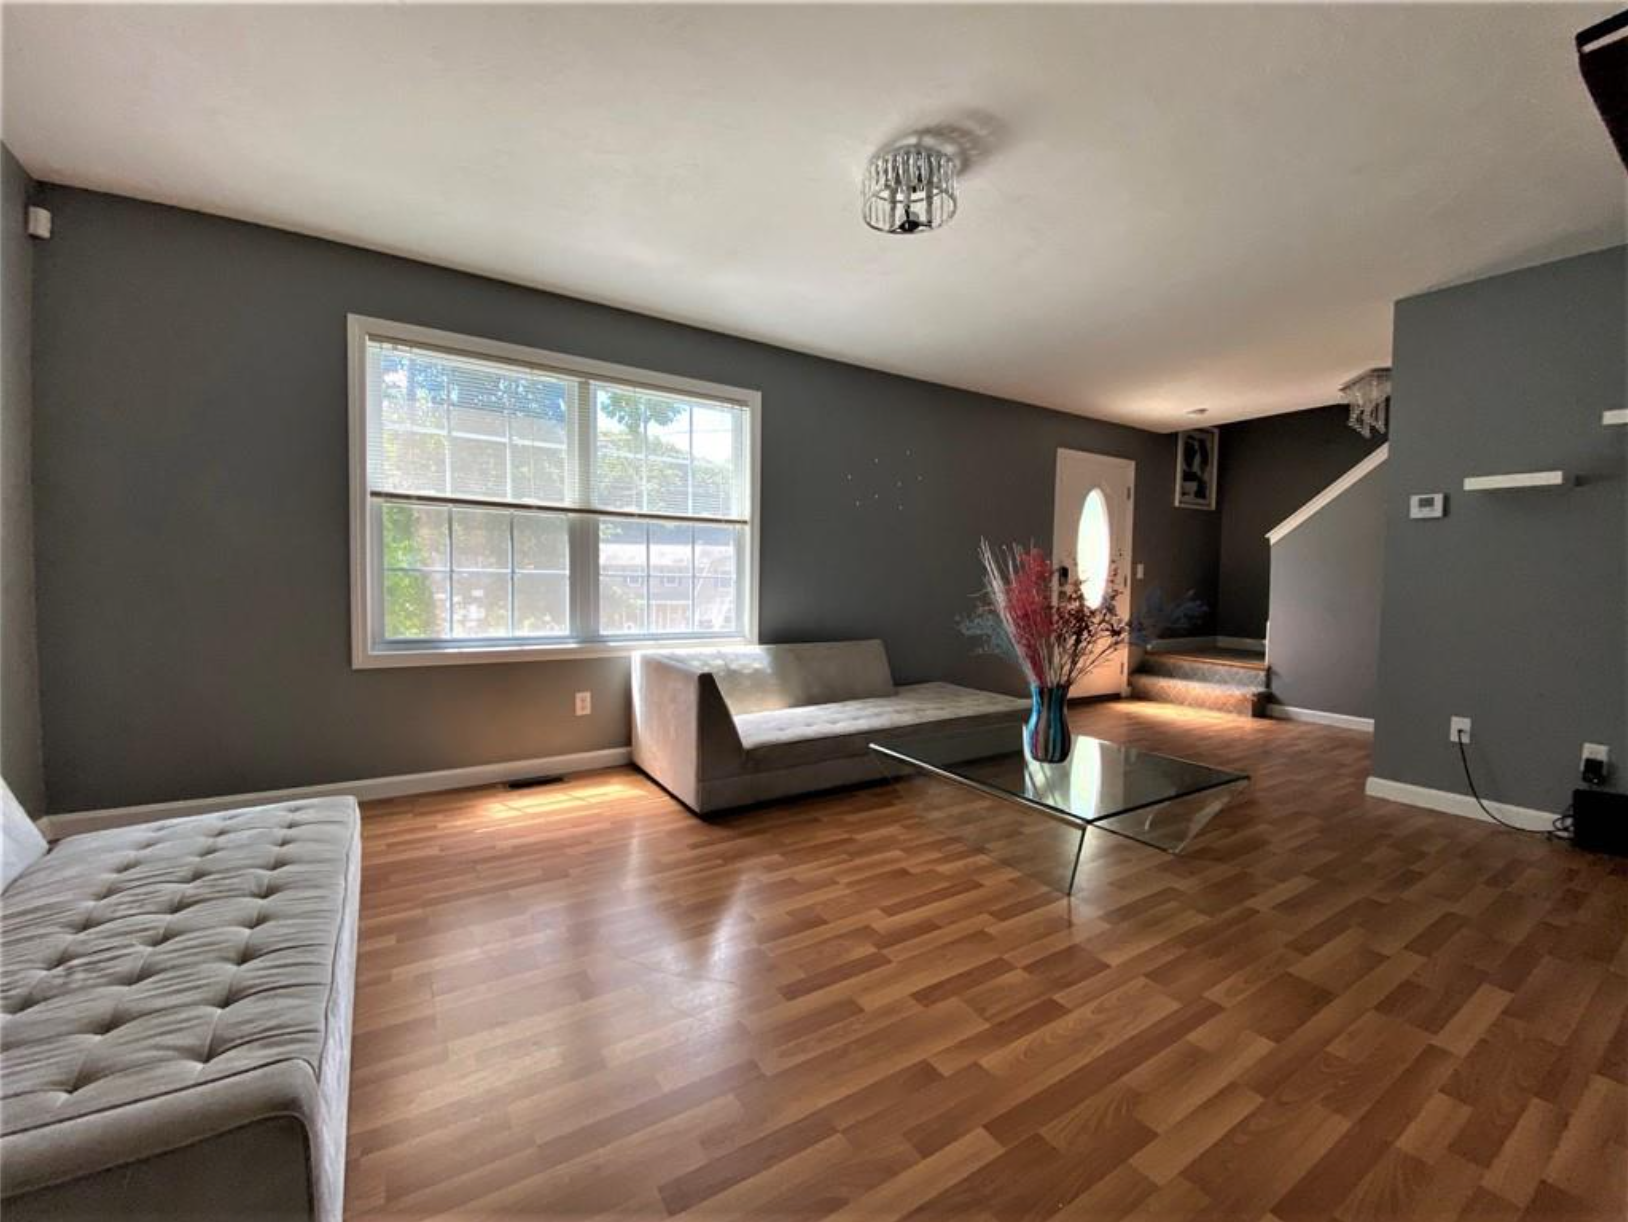 The living room has double-hung windows and dark gray walls with hardwood floors.